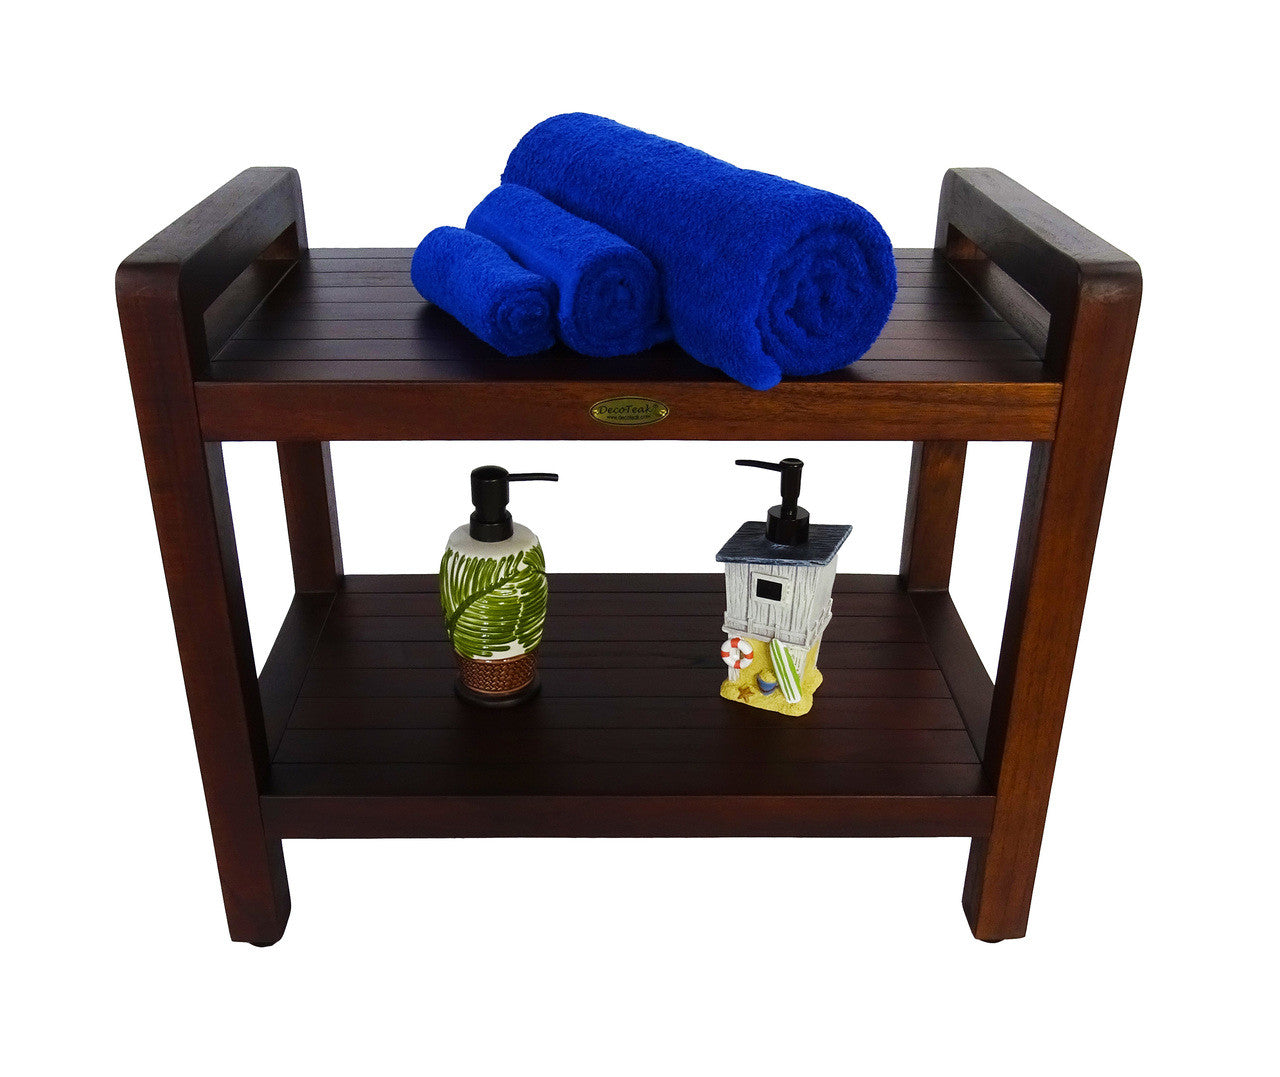 DecoTeak® Eleganto® 24" Teak Wood Shower Bench with LiftAide Arms and Shelf in Woodland Brown Finish